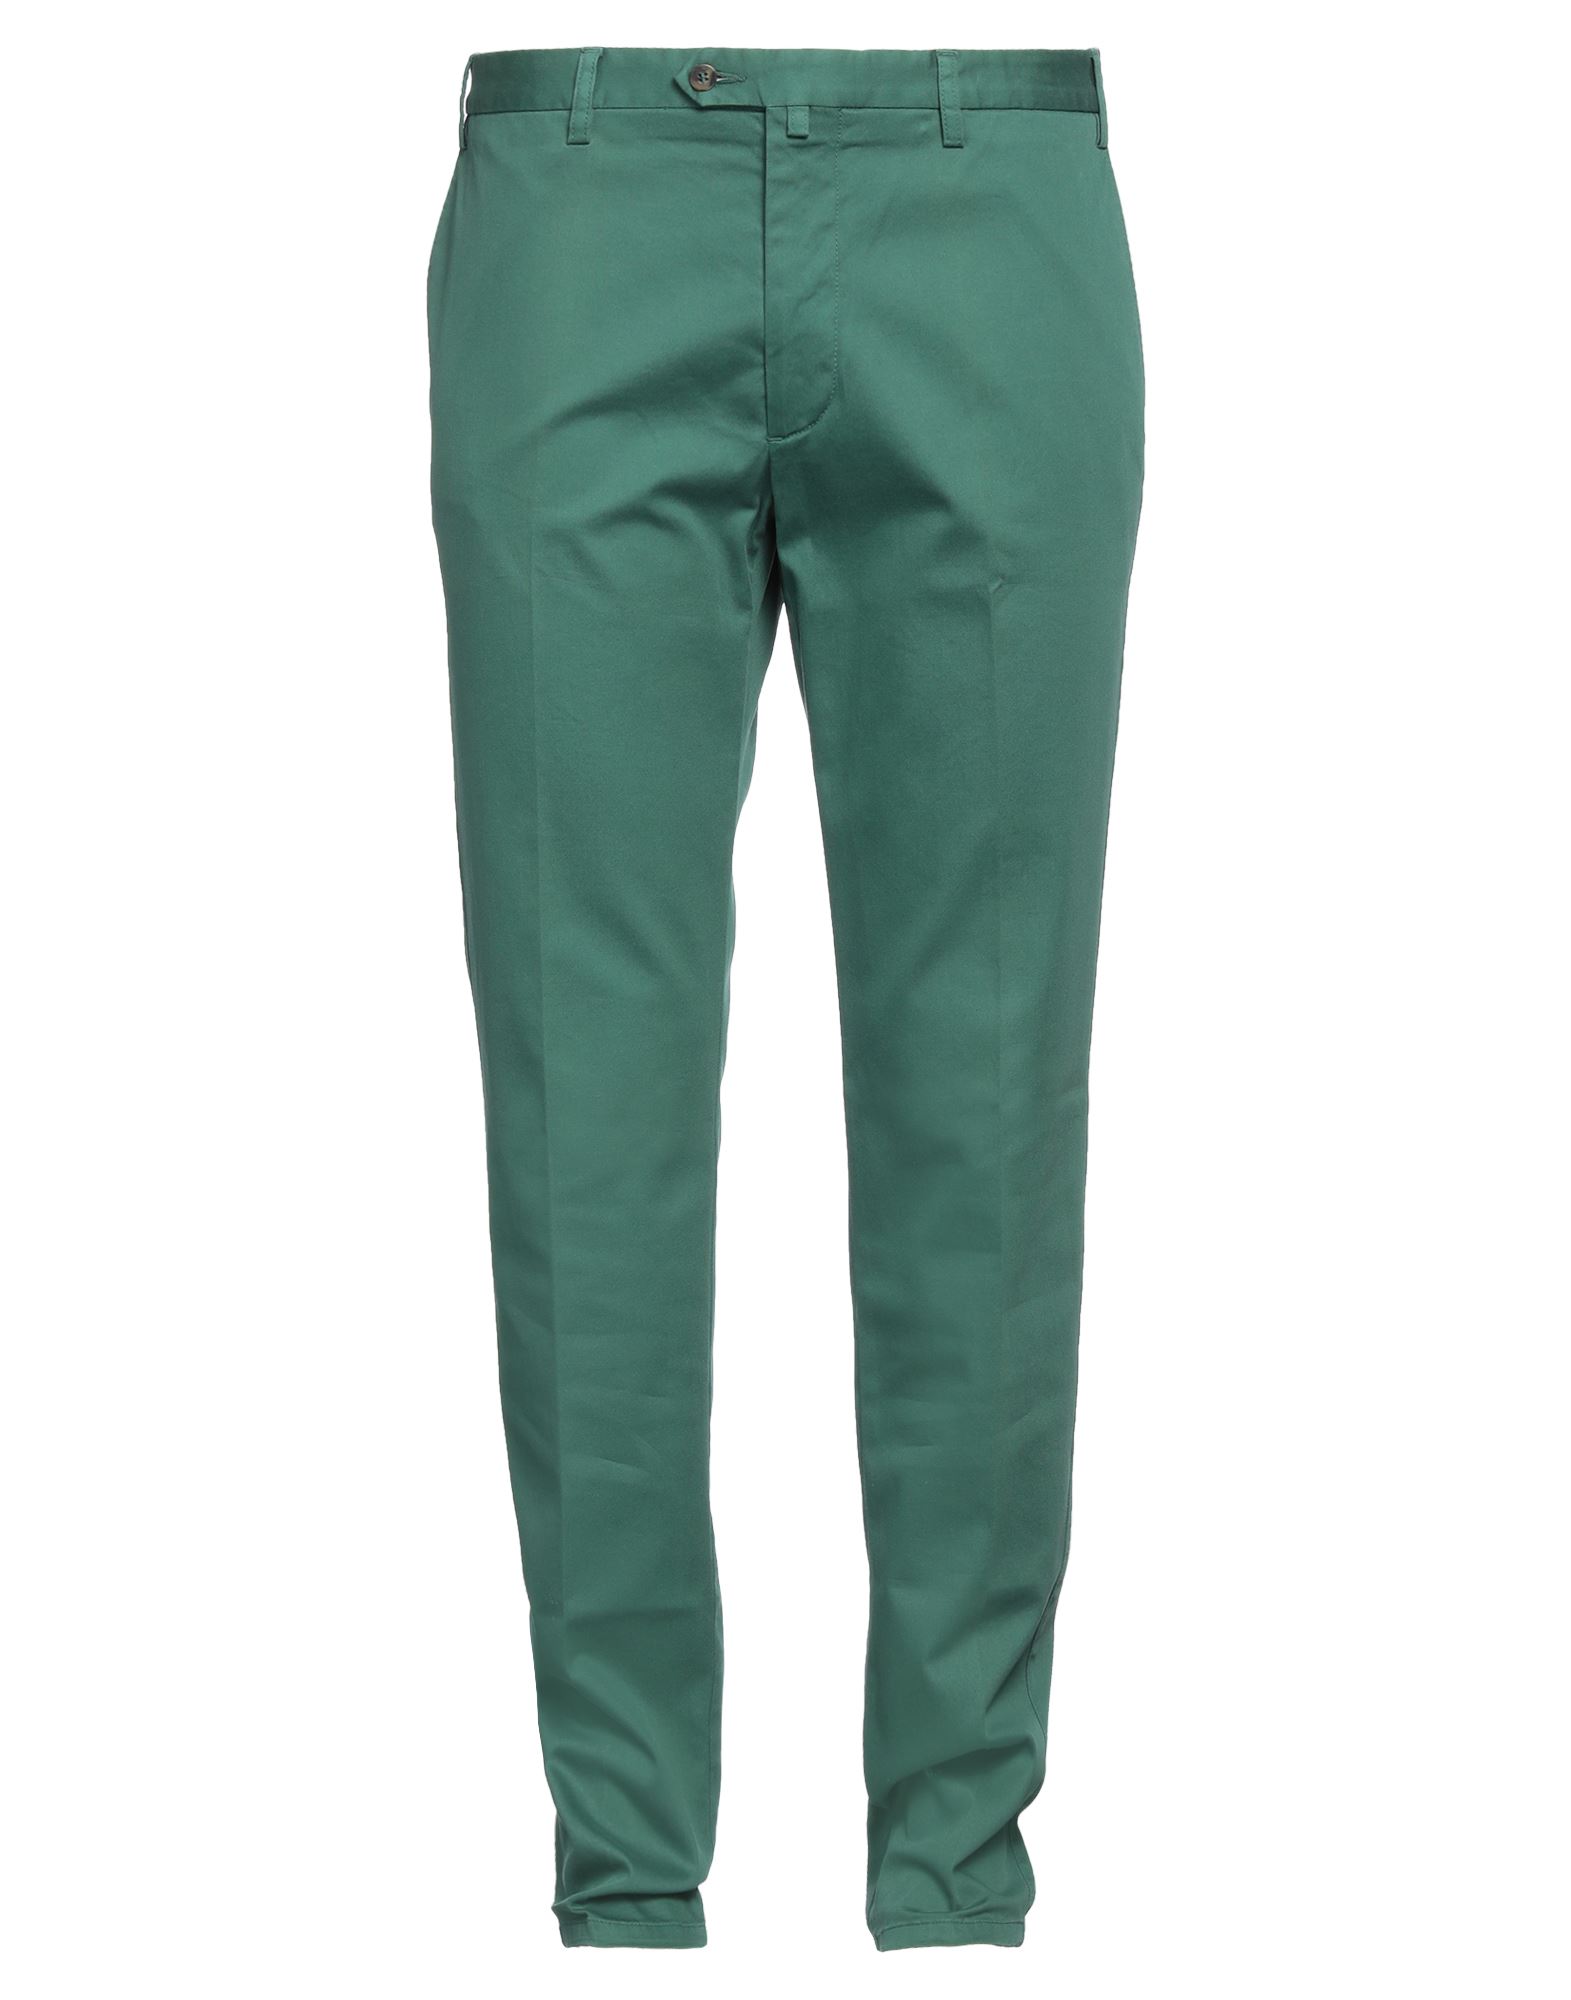 Nicwave Pants In Green